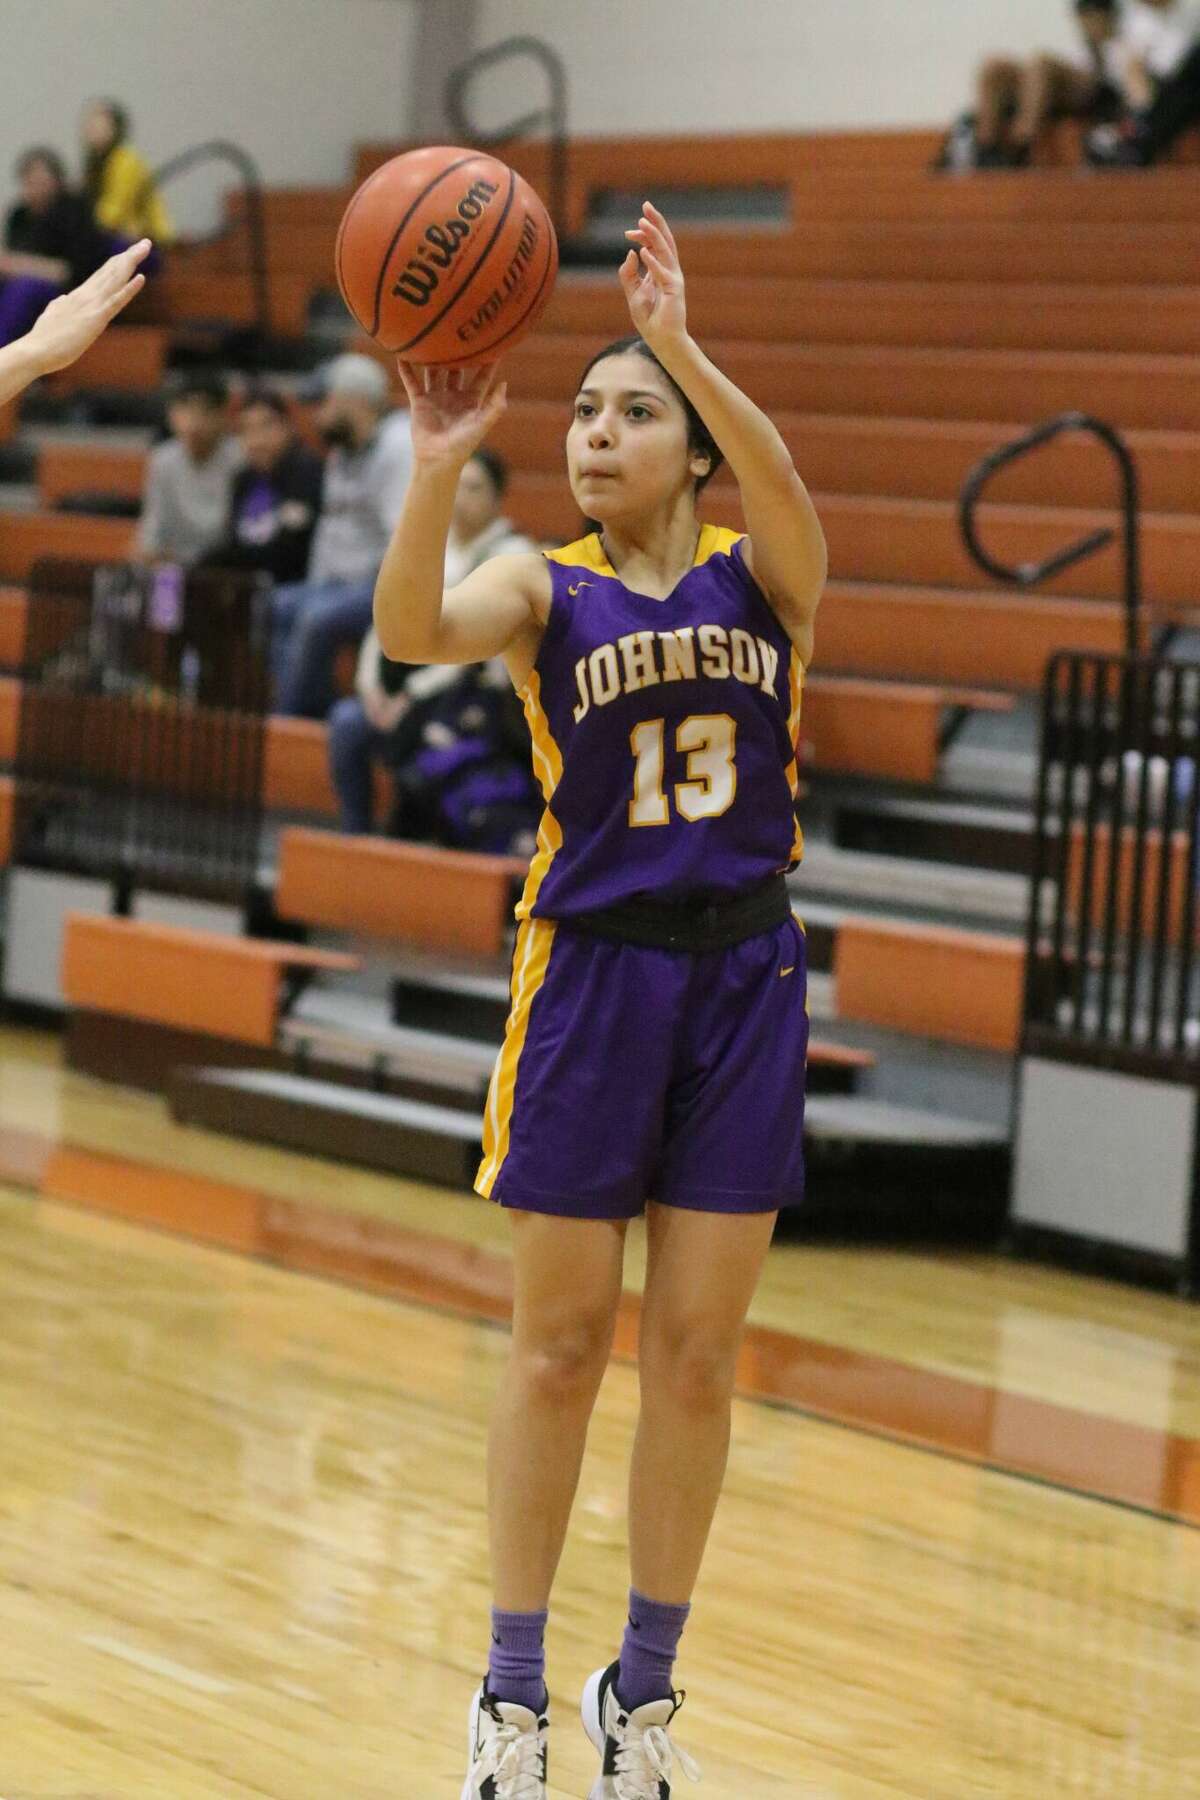 Leilani Medina and the LBJ Lady Wolves aim to strengthen their playoff hopes on Tuesday.